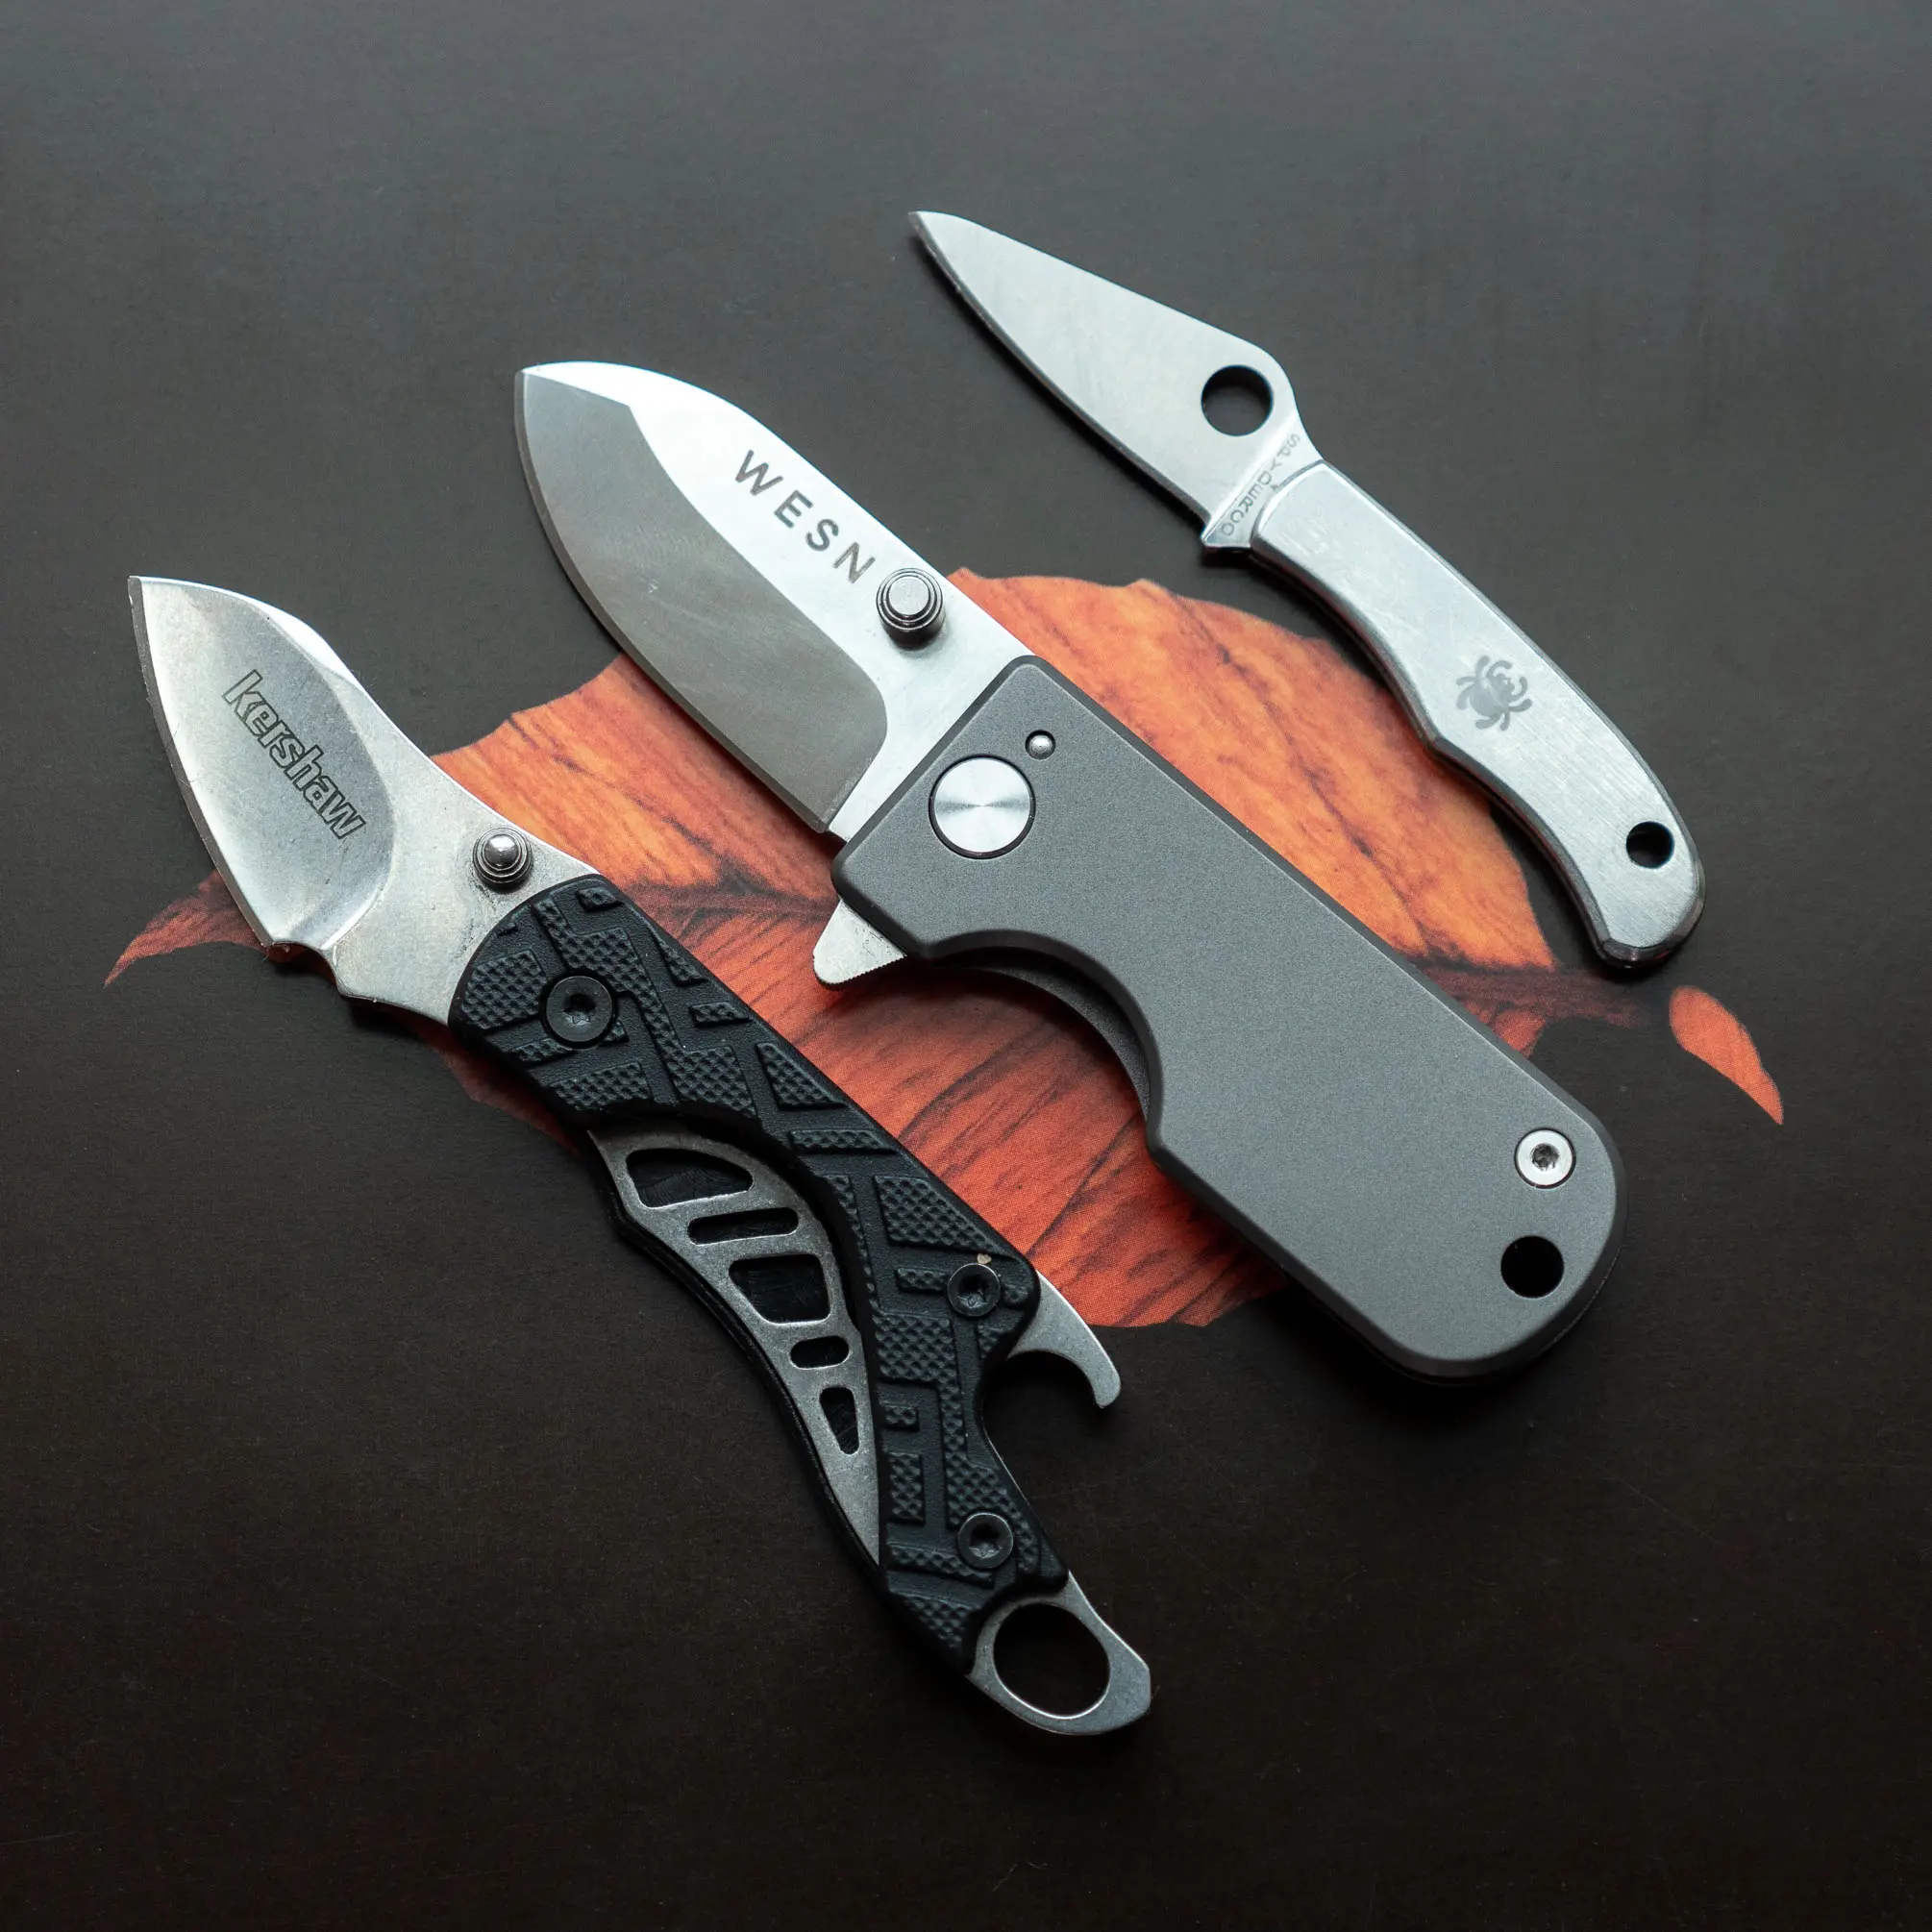 https://www.themodestman.com/wp-content/uploads/2020/11/Compact_EDC_knives.jpg